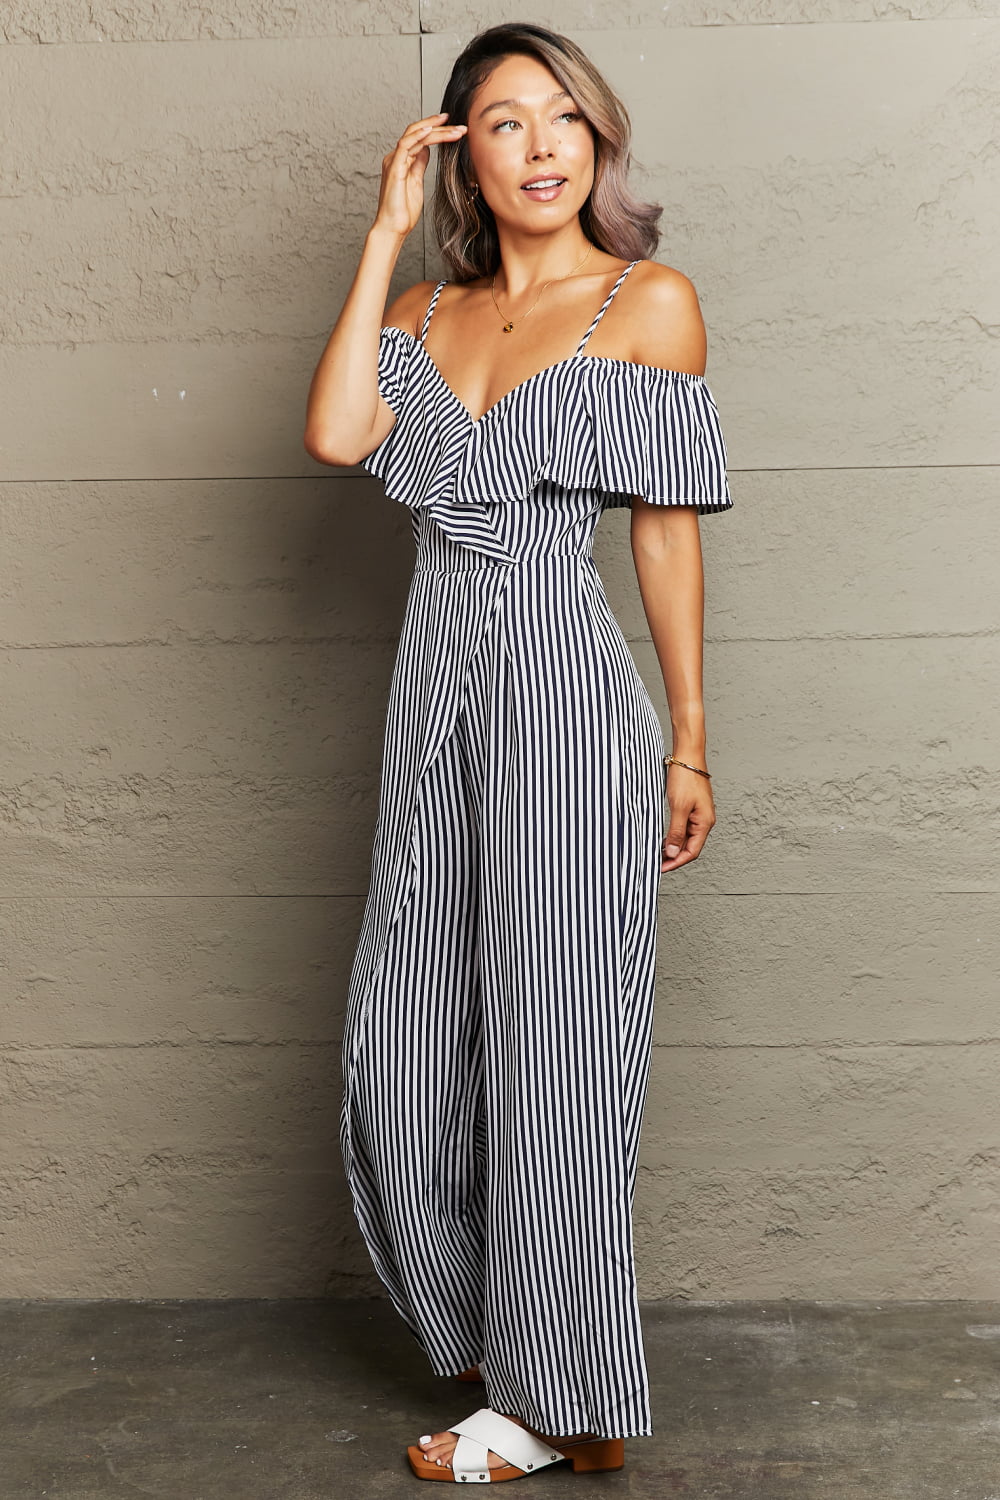 Rosy Brown Striped Spaghetti Strap Cold-Shoulder Jumpsuit Clothing